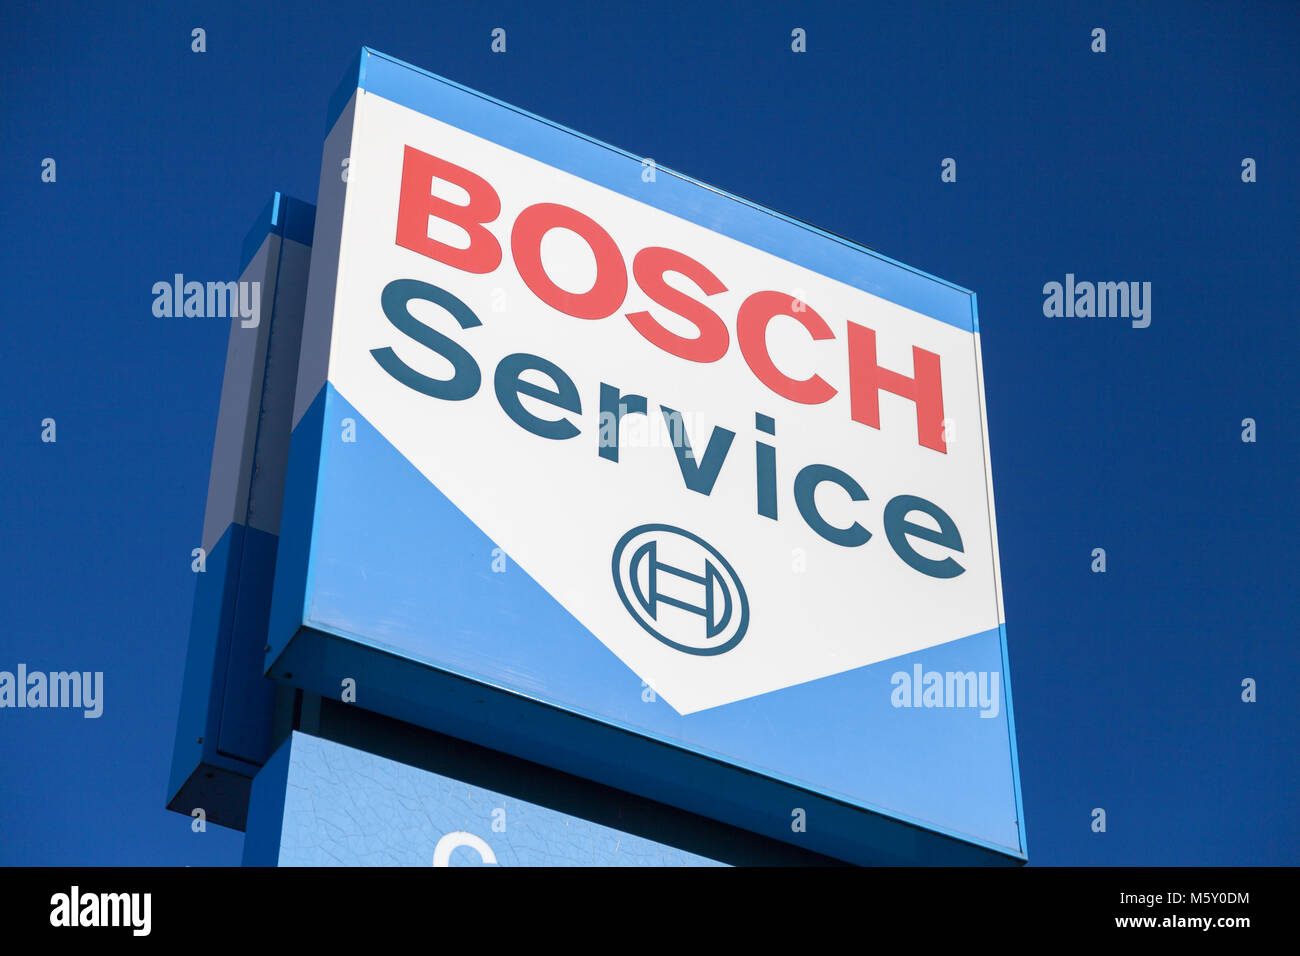 FUERTH / GERMANY - FEBRUARY 25, 2018: Bosch logo near a Bosch service building. Bosch is a German multinational engineering and electronics company he Stock Photo